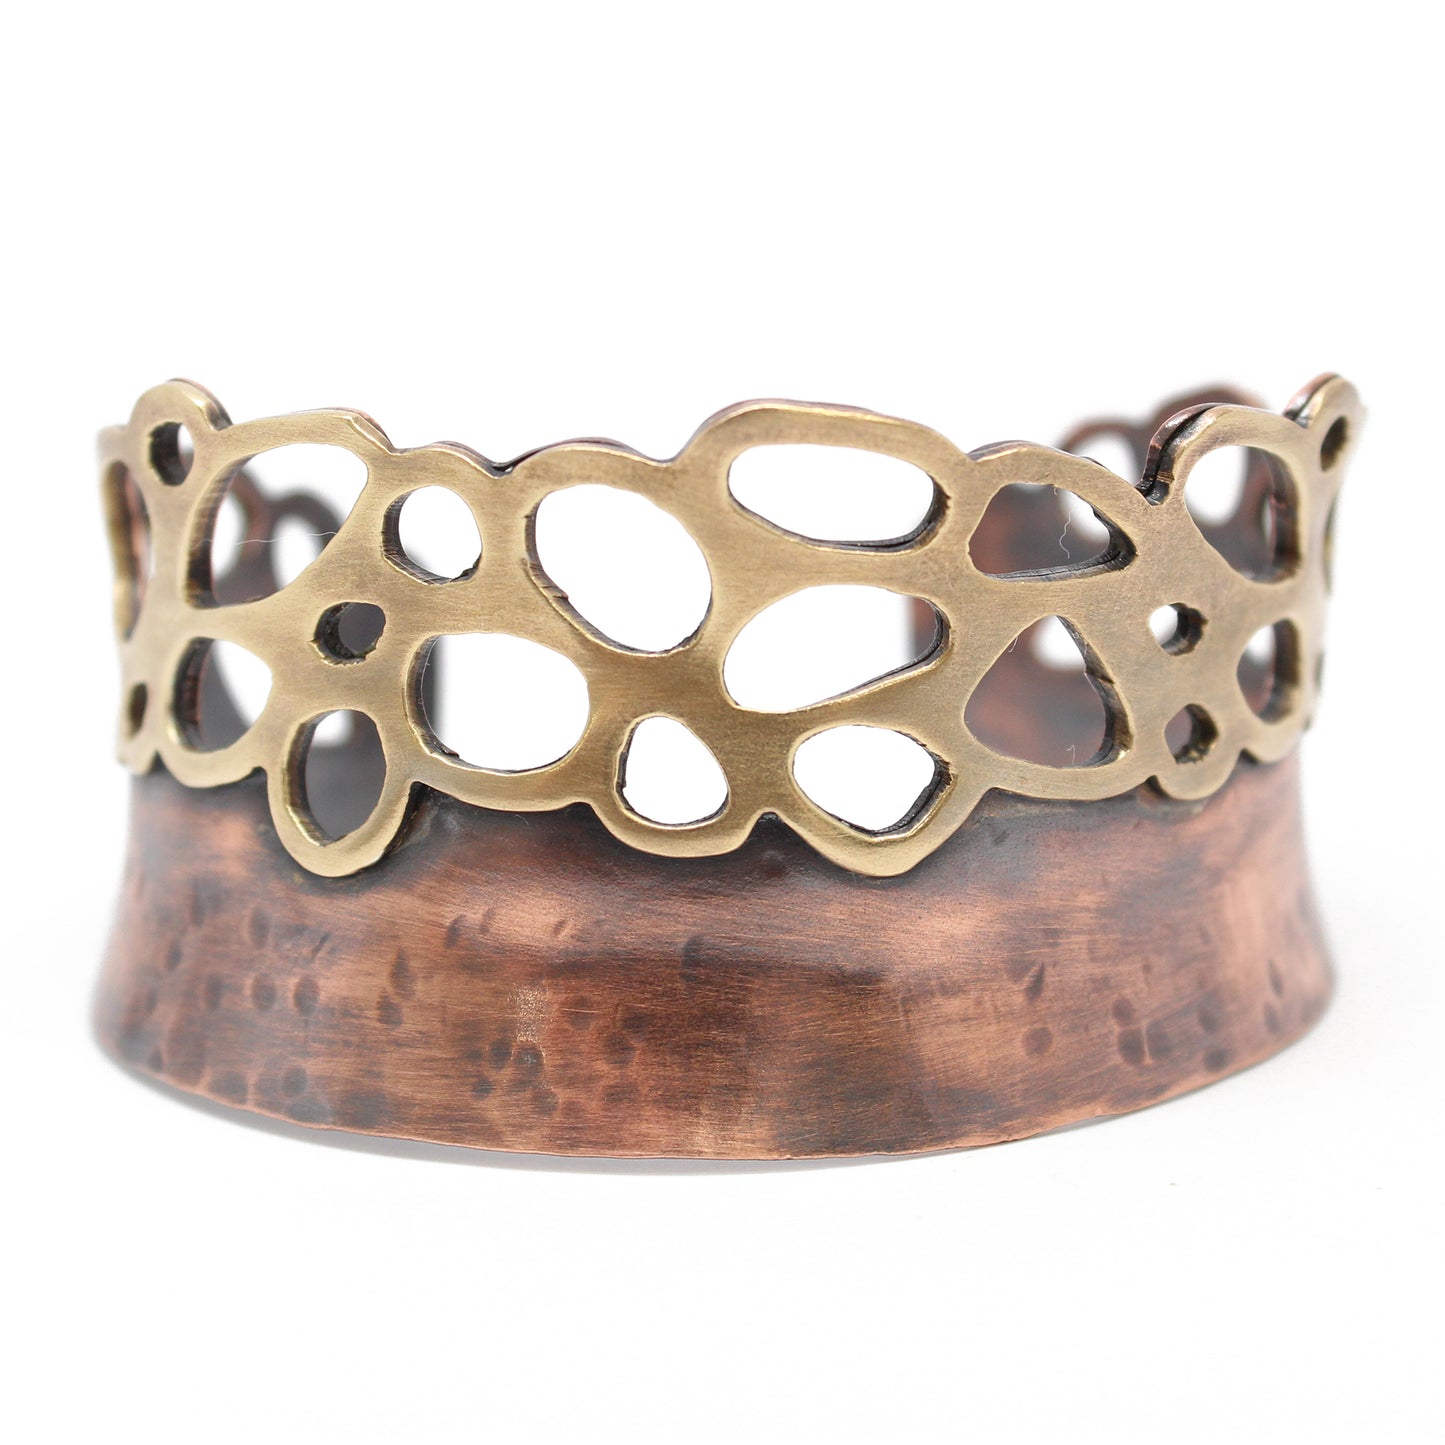 Handmade Wide Copper Cuff Bracelet with Brass Accents